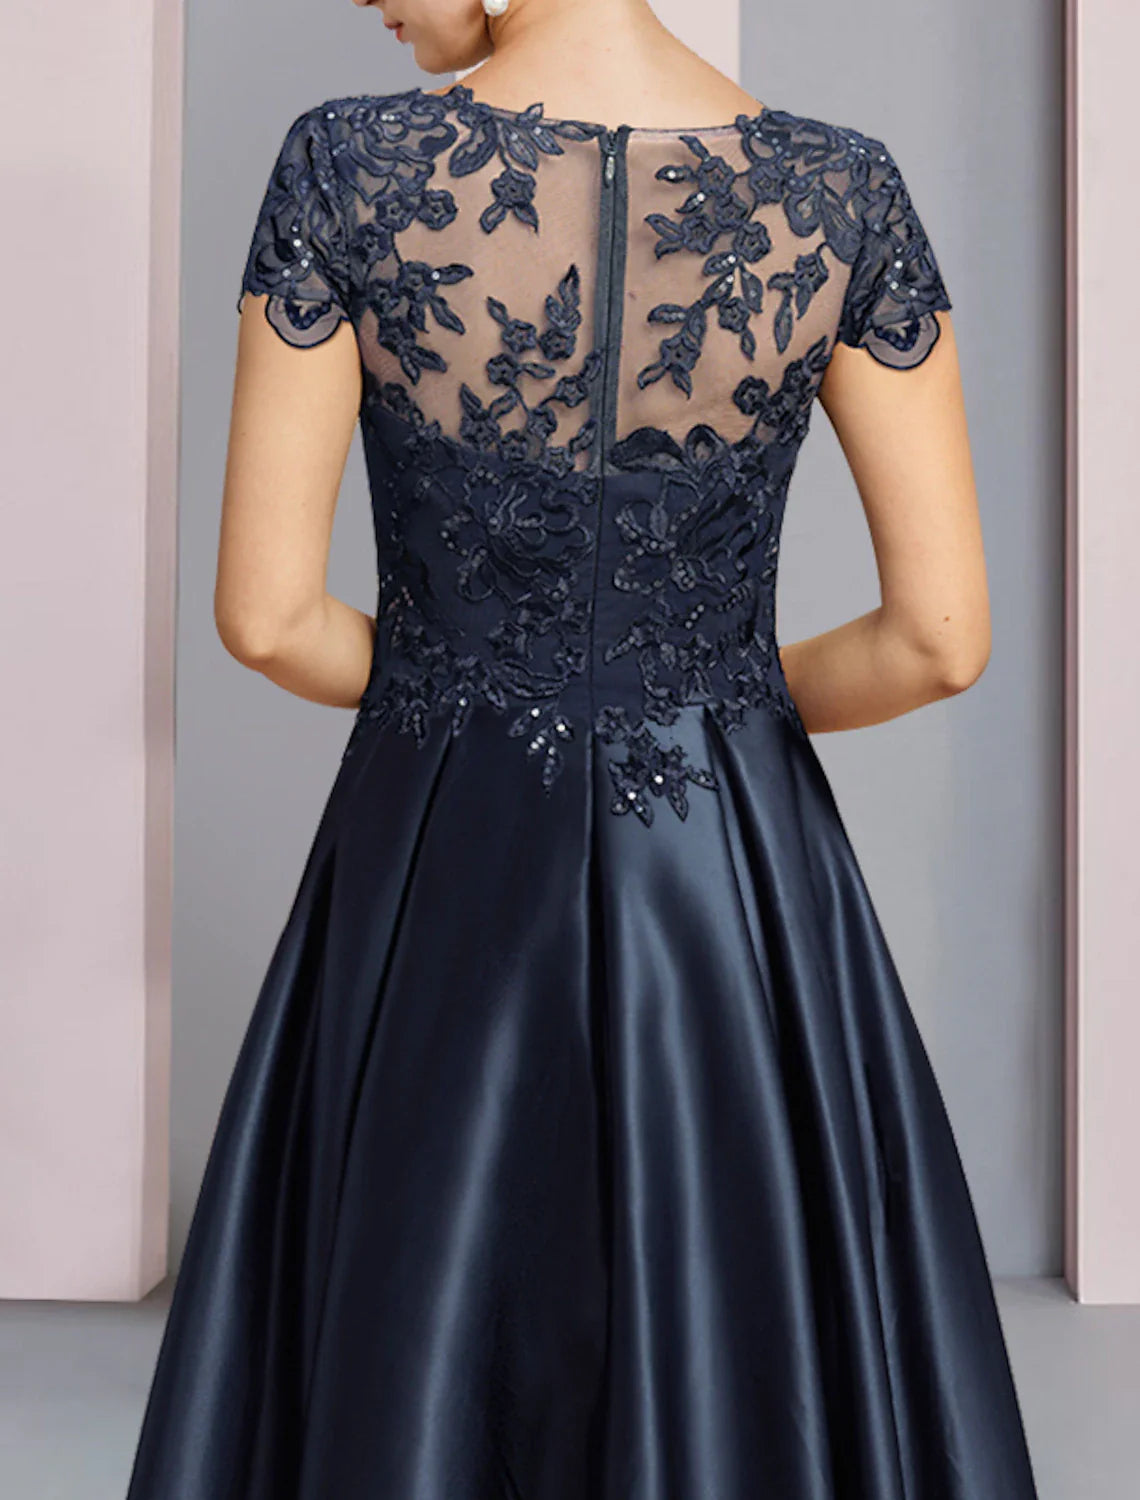 A-Line Mother of the Bride Dress Formal Wedding Guest Party Elegant High Low Scoop Neck Asymmetrical Tea Length Satin Lace Half Sleeve with Sequin Appliques